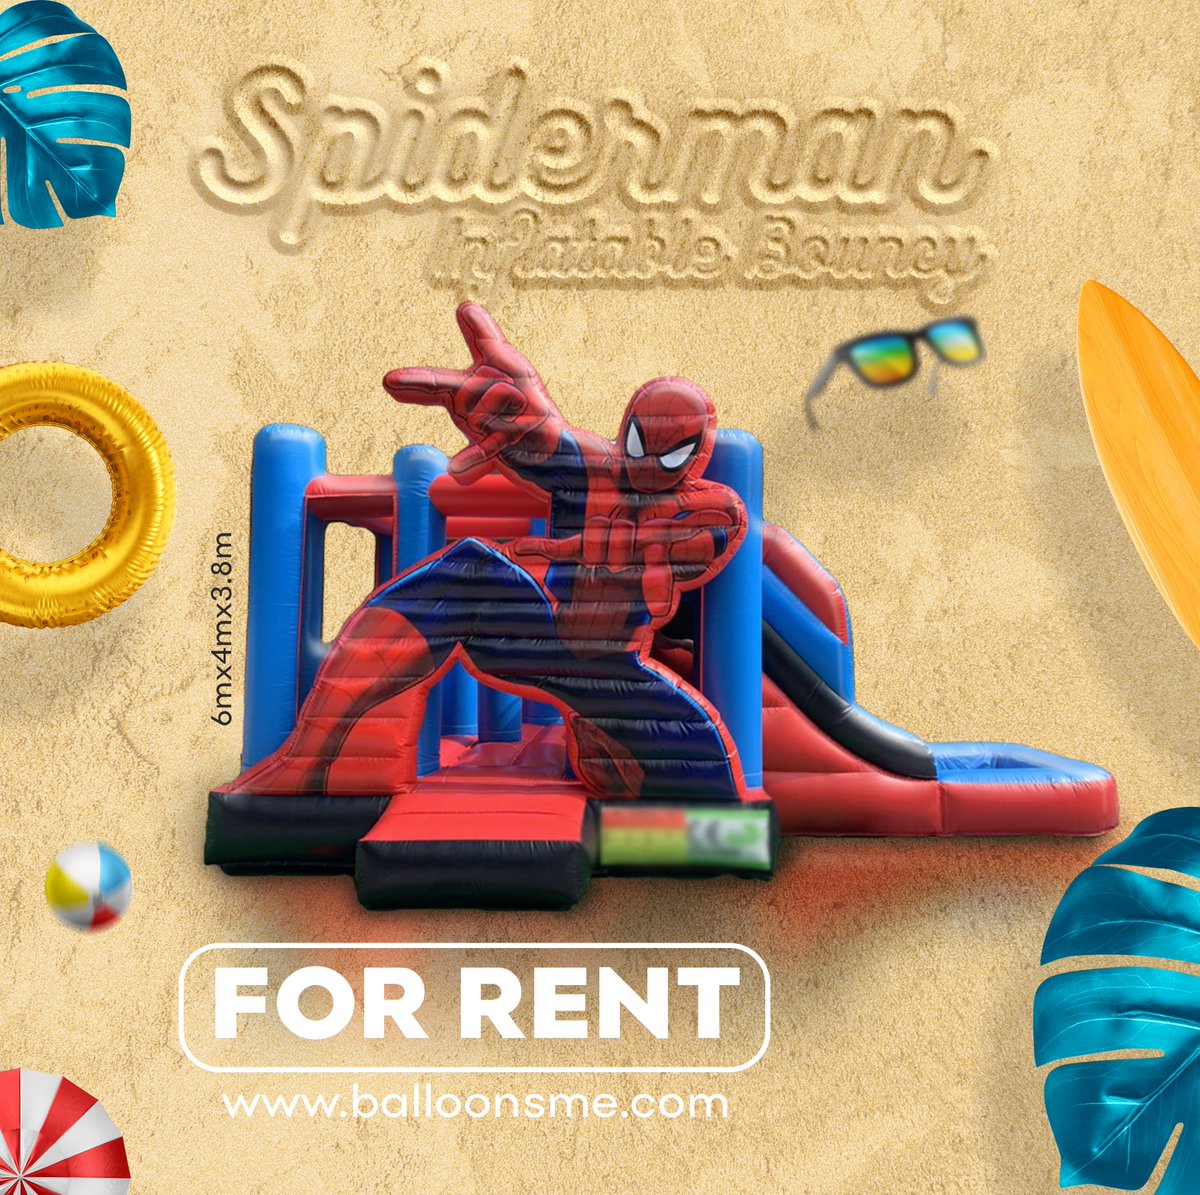 Jump into endless fun this summer with our Spiderman Inflatable Bouncy! Perfect for kids and adults alike.

balloonsme.com

#inflatables #games #events #kidsactivities #bouncingcastle #eventactivities #summergames #summersale #summer #funtime #rentalitems #abudhabi